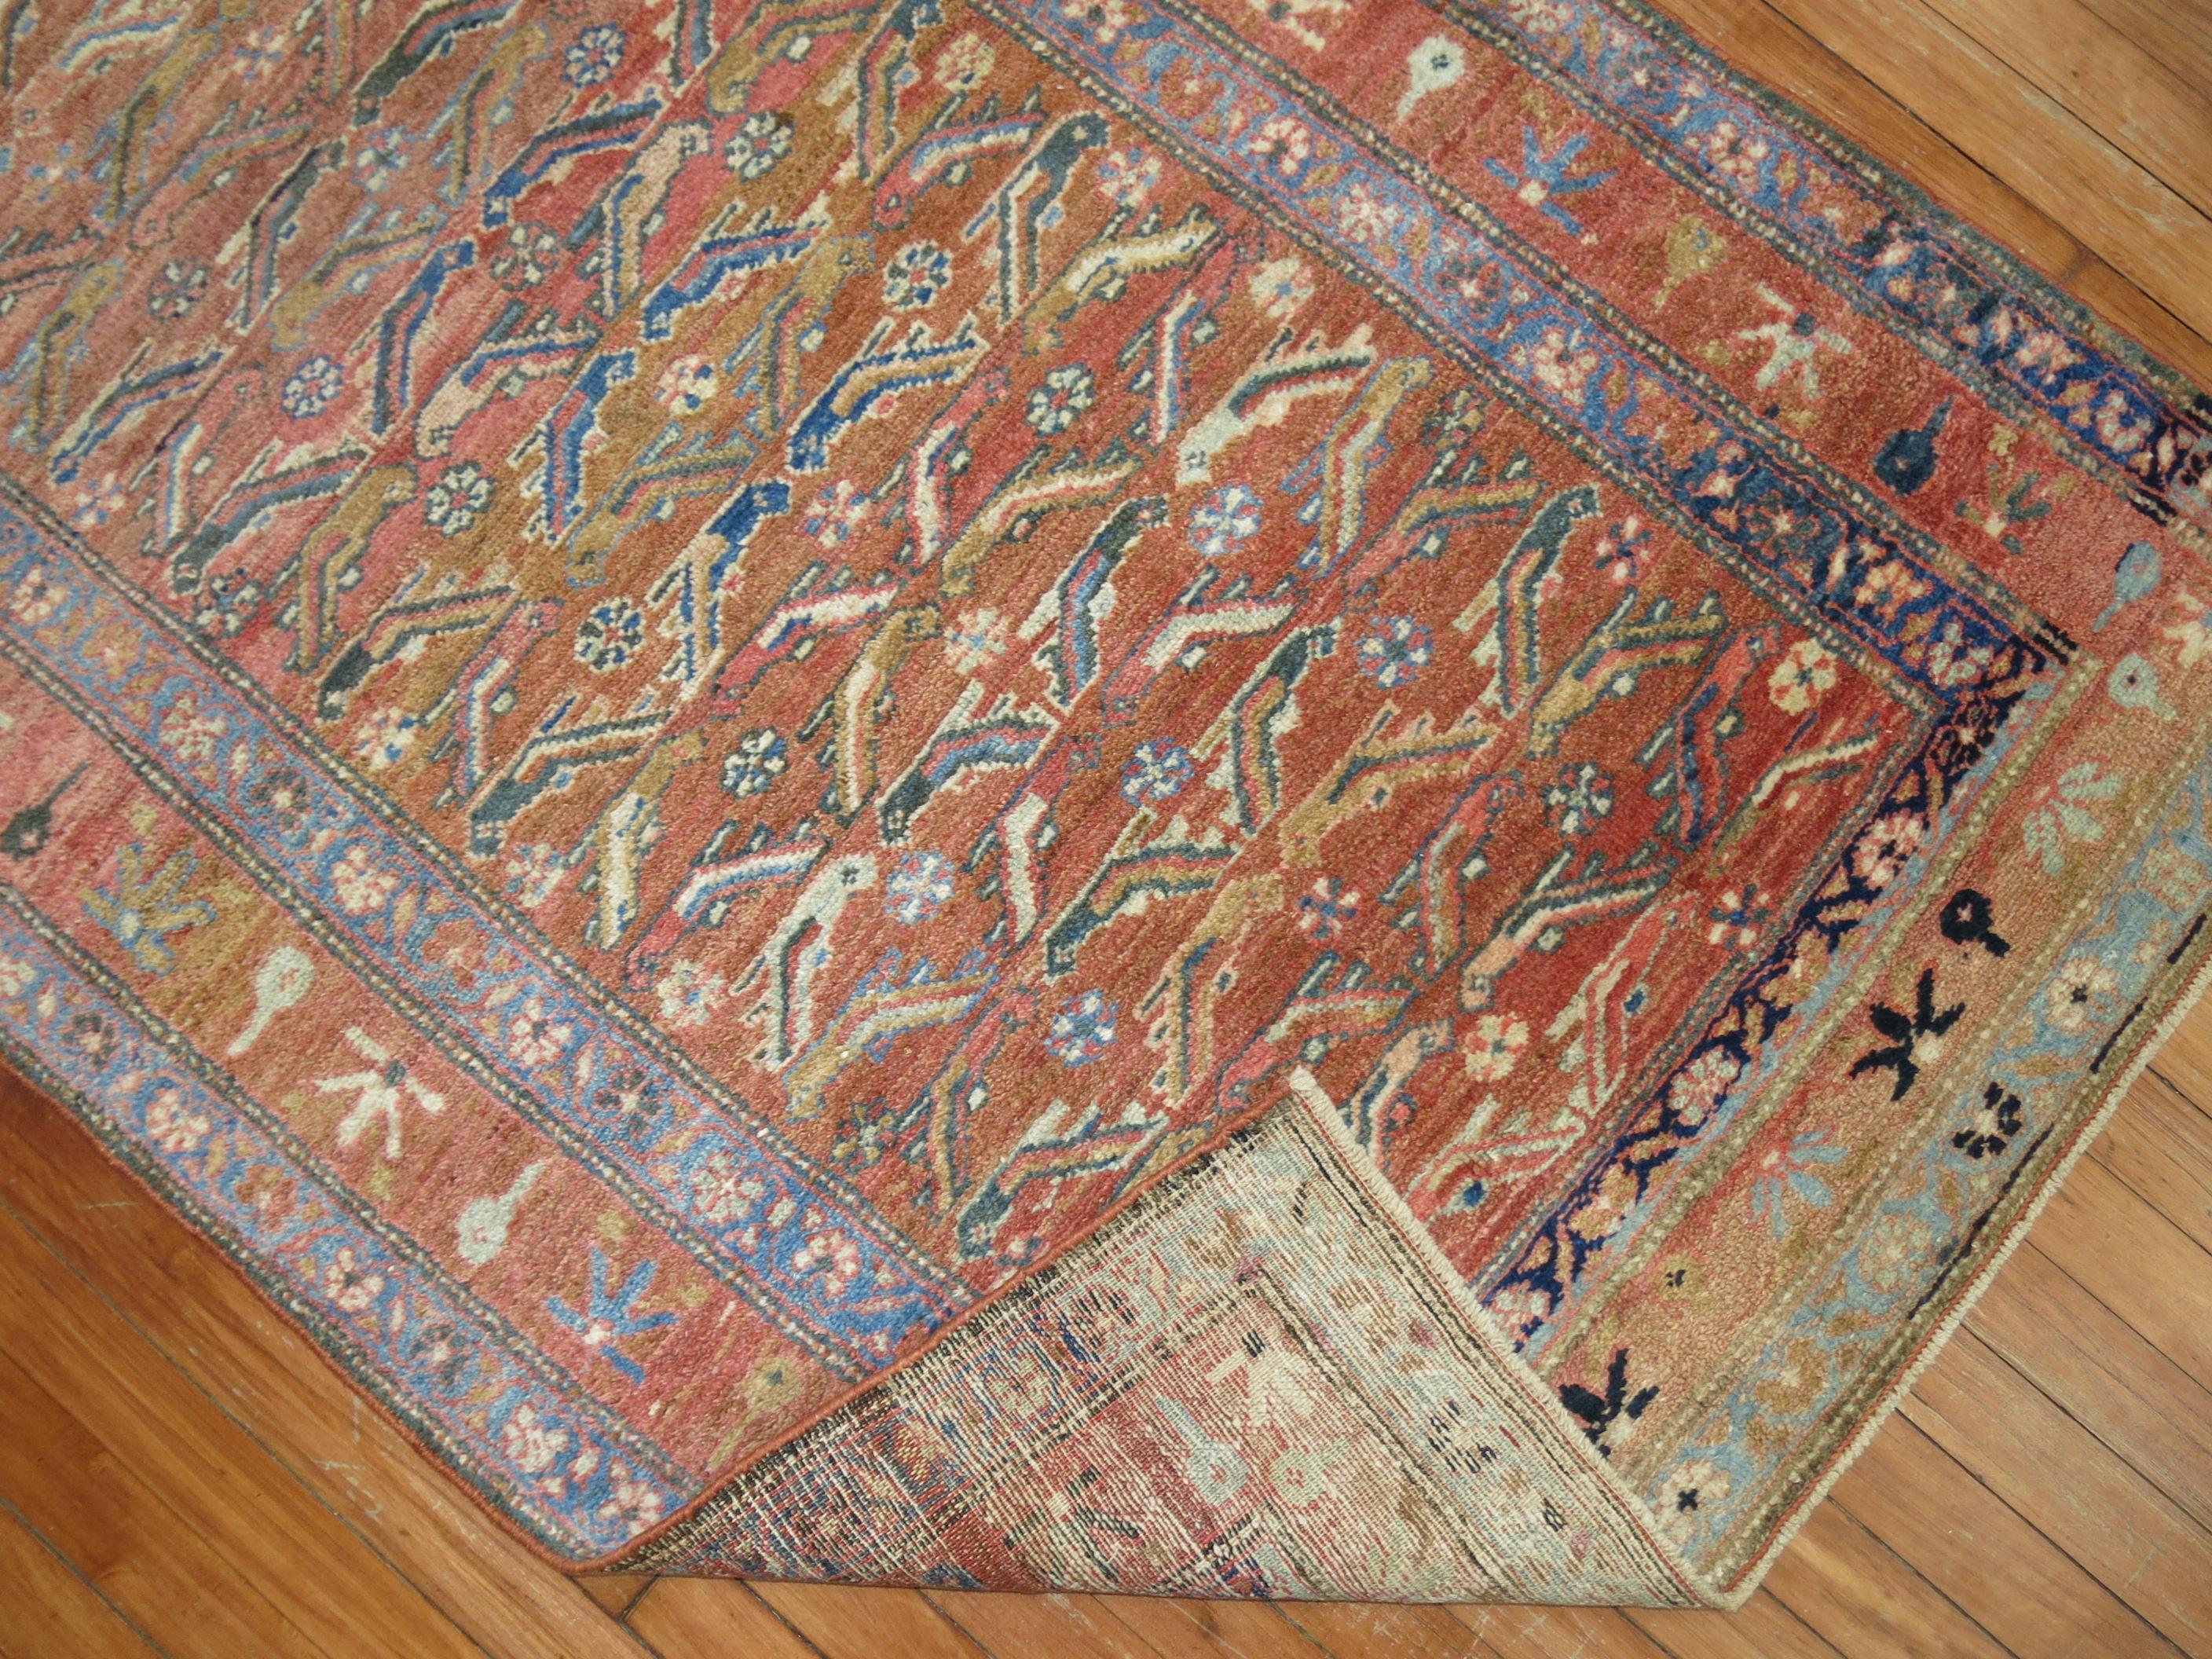 Vintage decorative Persian rug from Hamadan village located in northwest Persian.

3'6'' x 5'4''